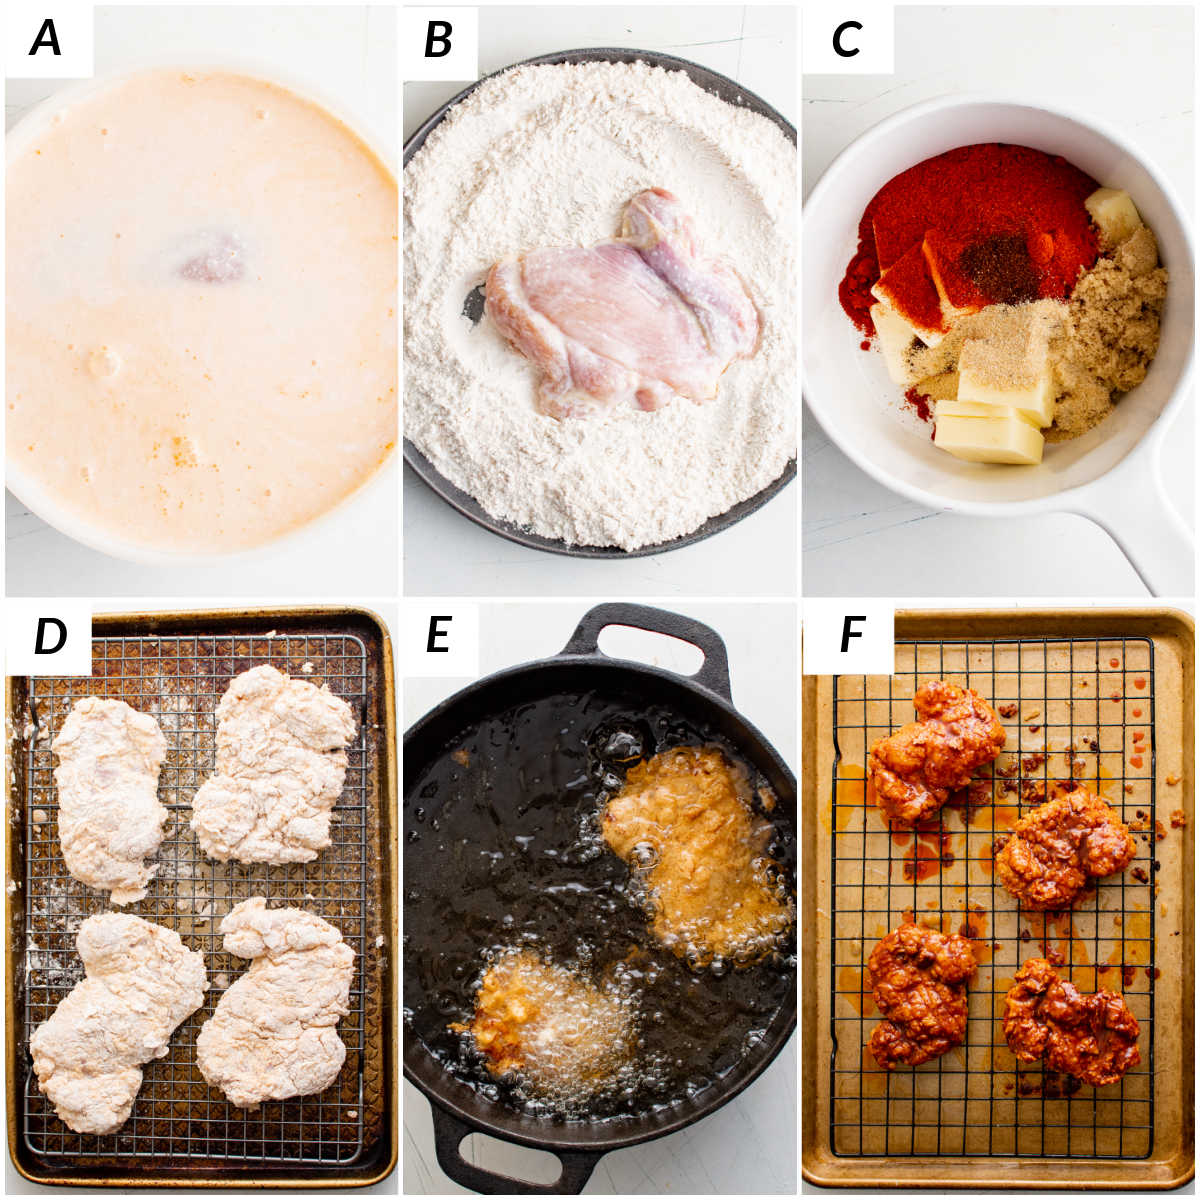 image collage showing some of the steps for making Nashville Hot Chicken